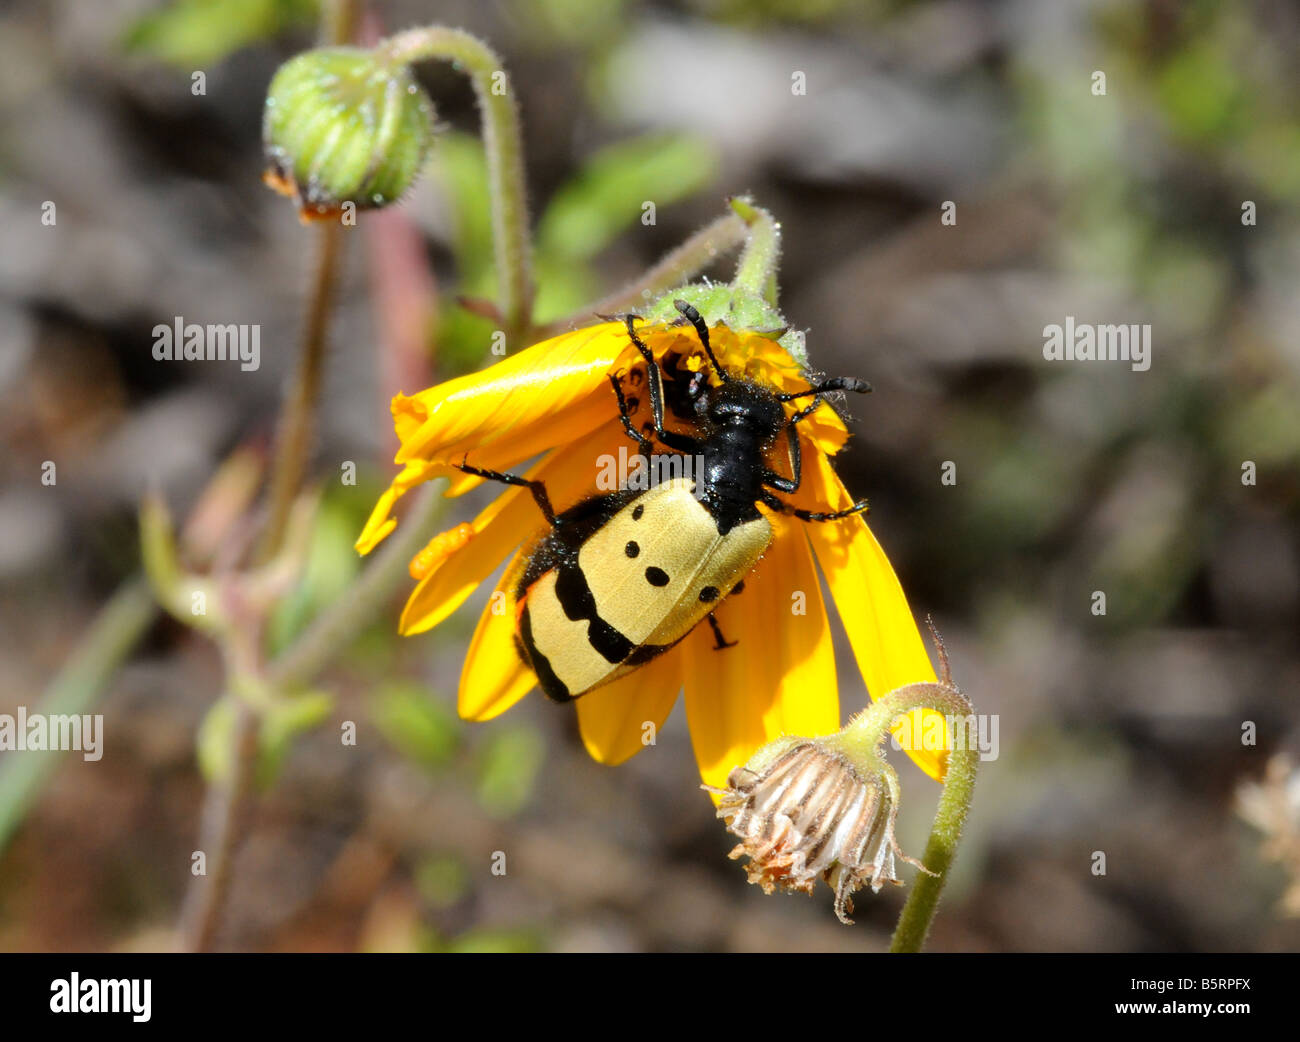 A Blister Beetle Chewing up a Daisy for Lunch Stock Photo